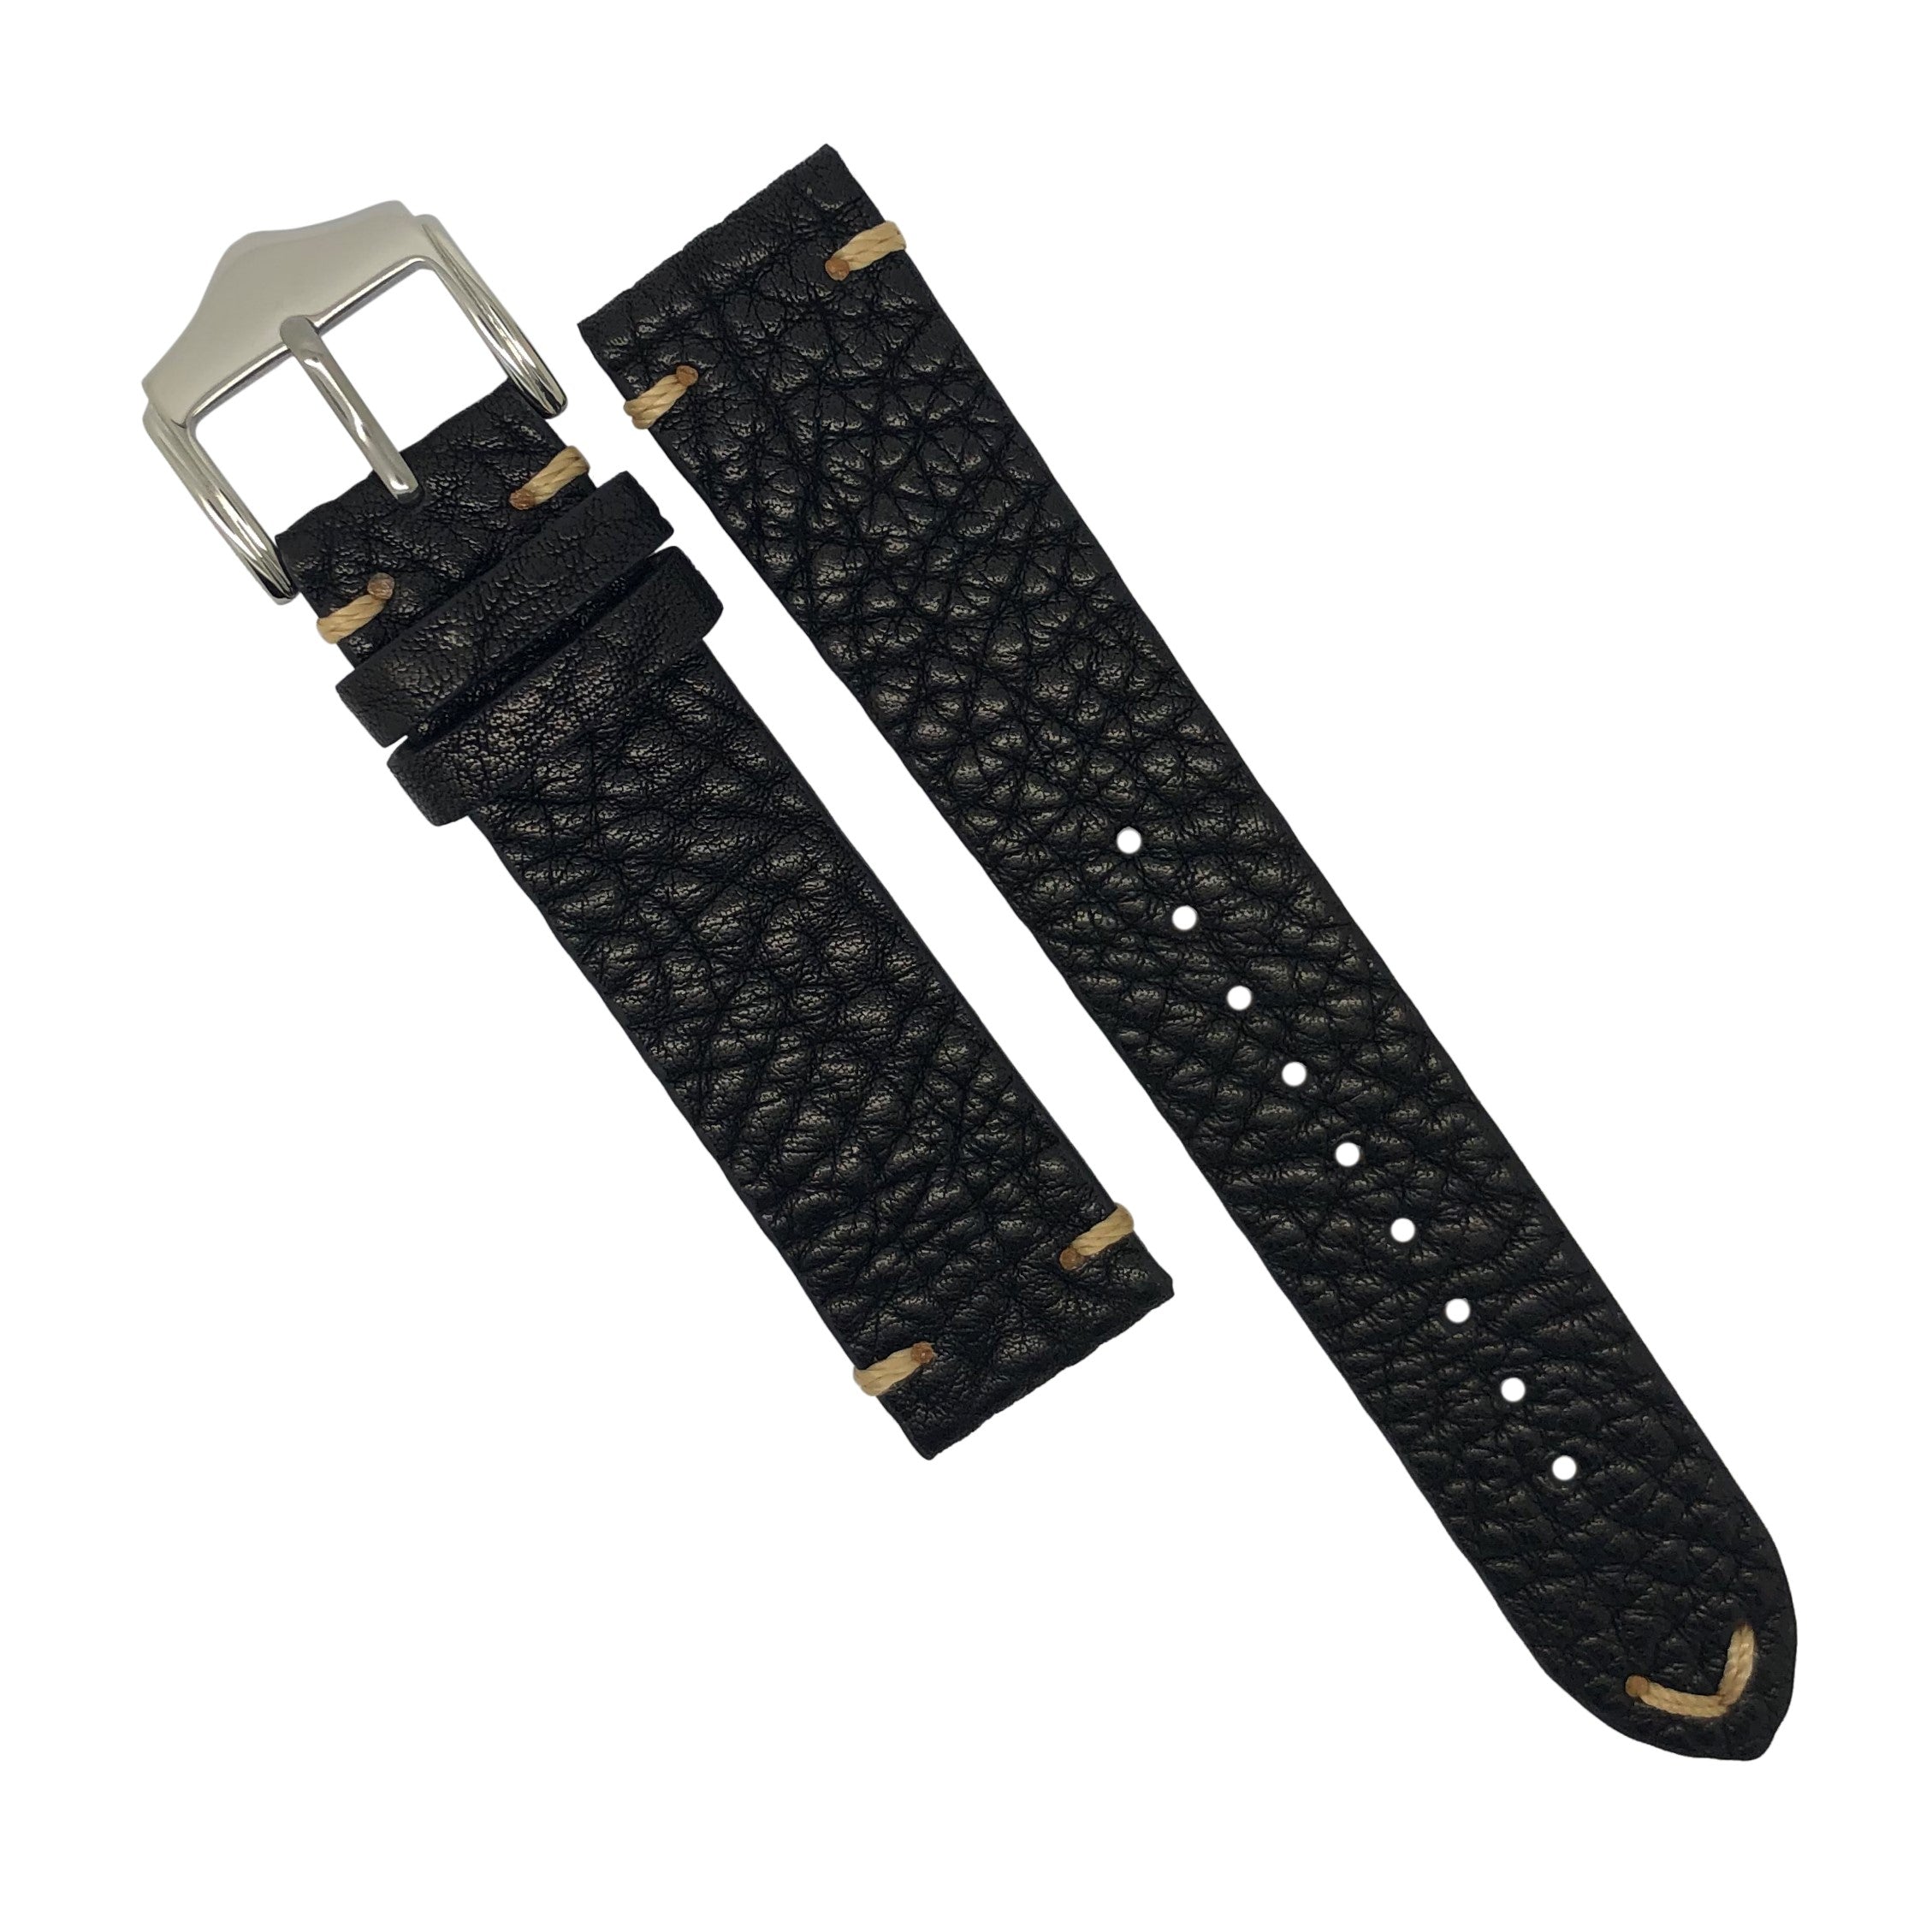 Premium Vintage Calf Leather Watch Strap in Distressed Black (20mm) - Nomad Watch Works Malaysia